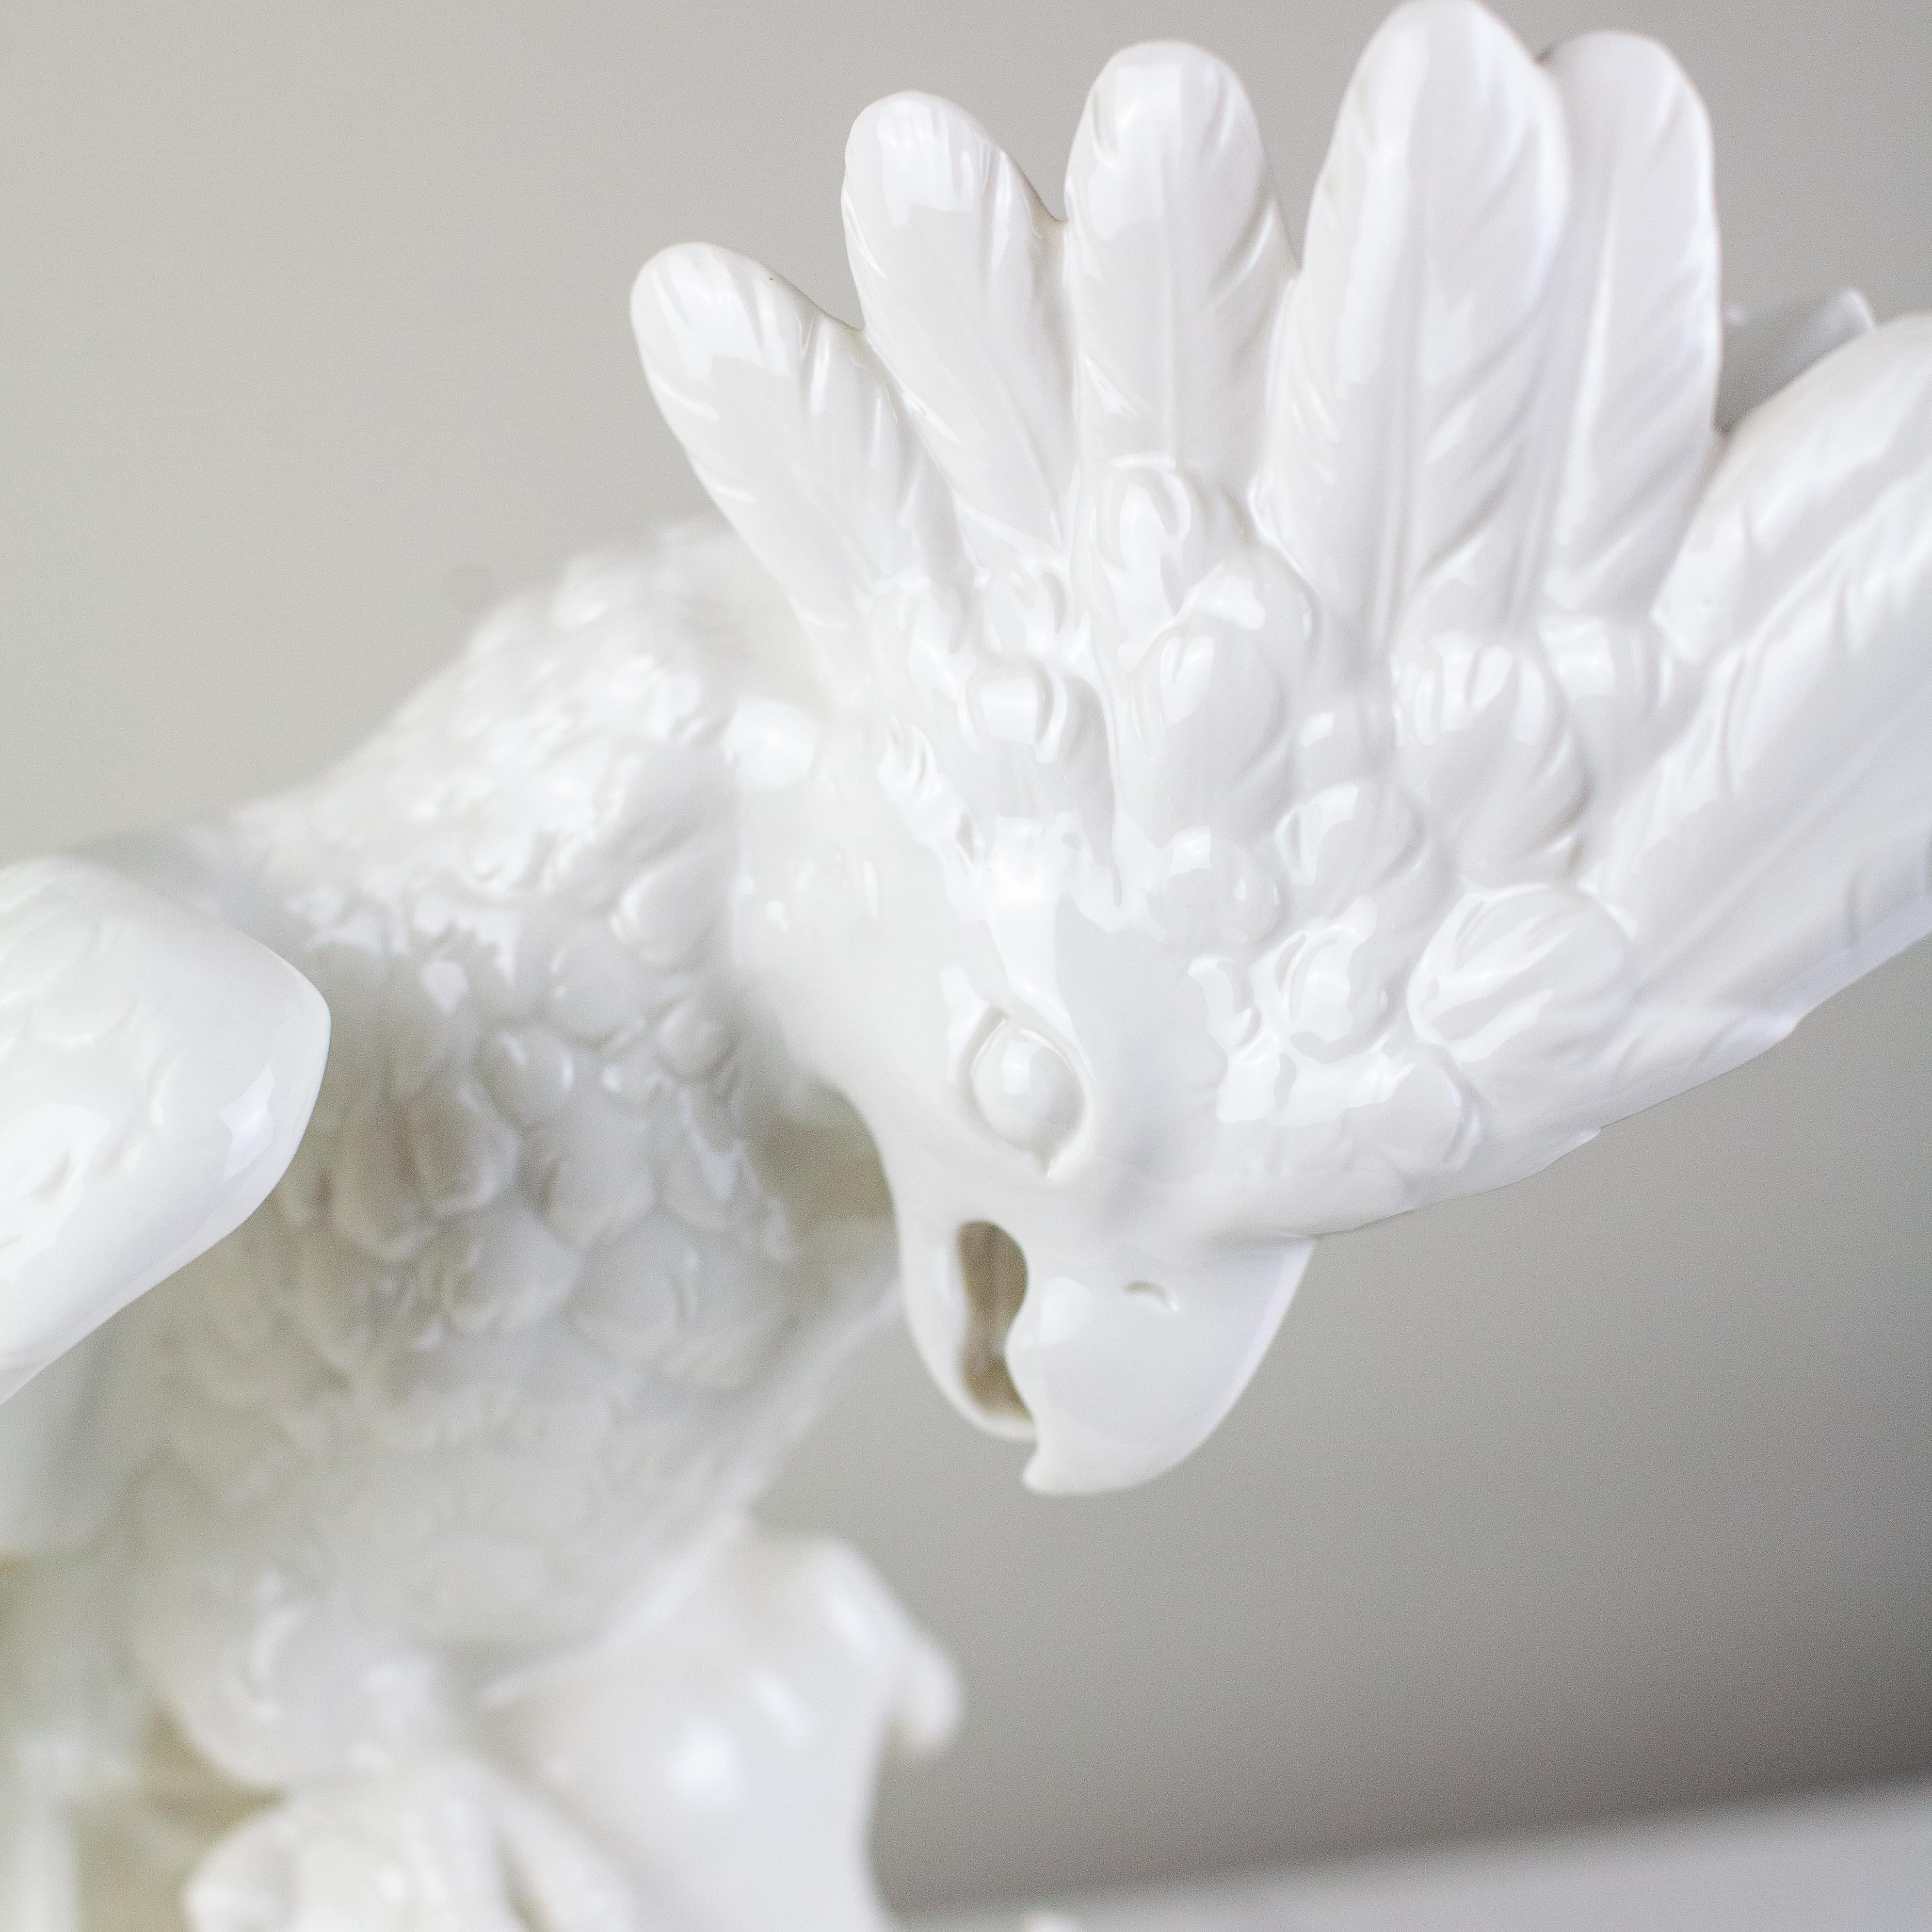 For your consideration, fleurdetroit presents this fanciful sculpture depicting a playful cockatoo. These mid-century, Italian sculptures are perfectly suited for any interior aesthetic. 

Please visit our storefront for other examples of these